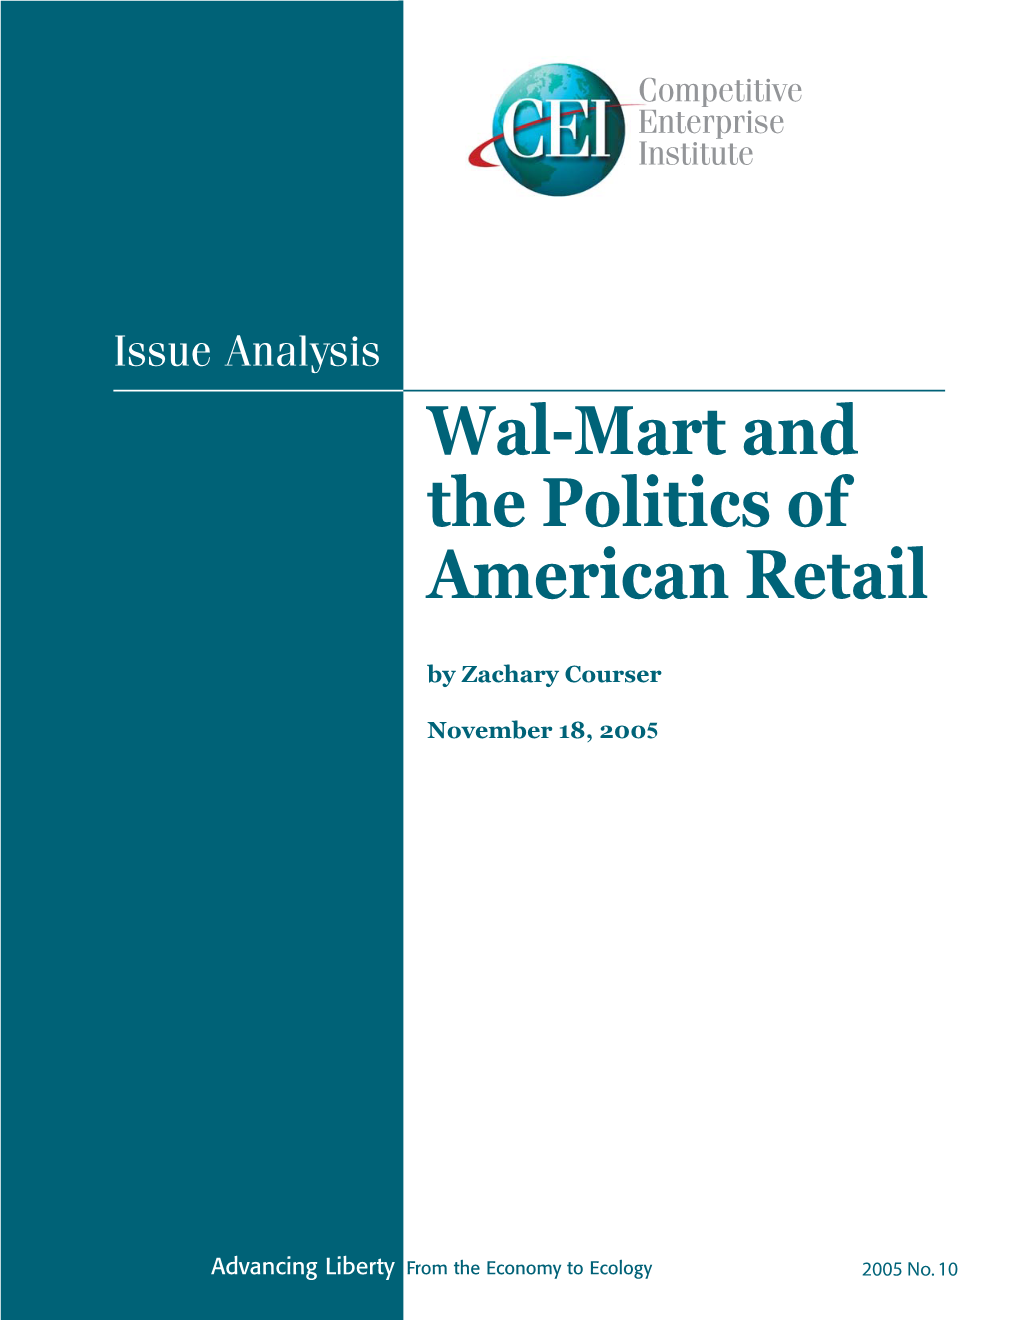 Wal-Mart and the Politics of American Retail